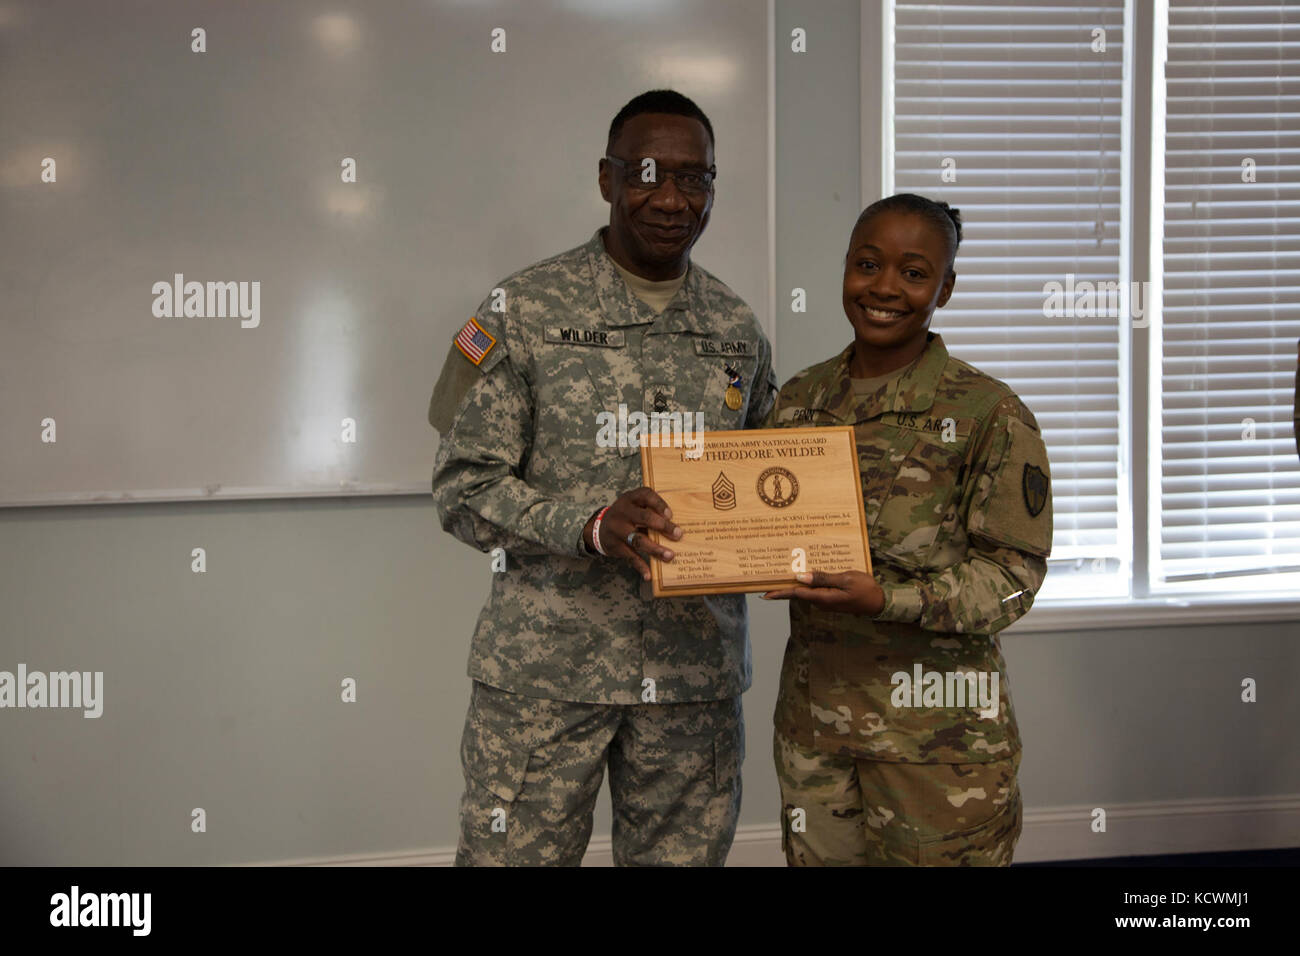 U.S. Army Sgt. 1st Class Felicia Penn presents Master Sgt. Theodore Wilder with a retirement award as the South Carolina National Guard recognizes Wilder’s 37 years of service during a retirement ceremony at McCrady Training Center in Eastover, South Carolina, March 9, 2017. (U.S. Army National Guard photo by Capt. Brian Hare) Stock Photo